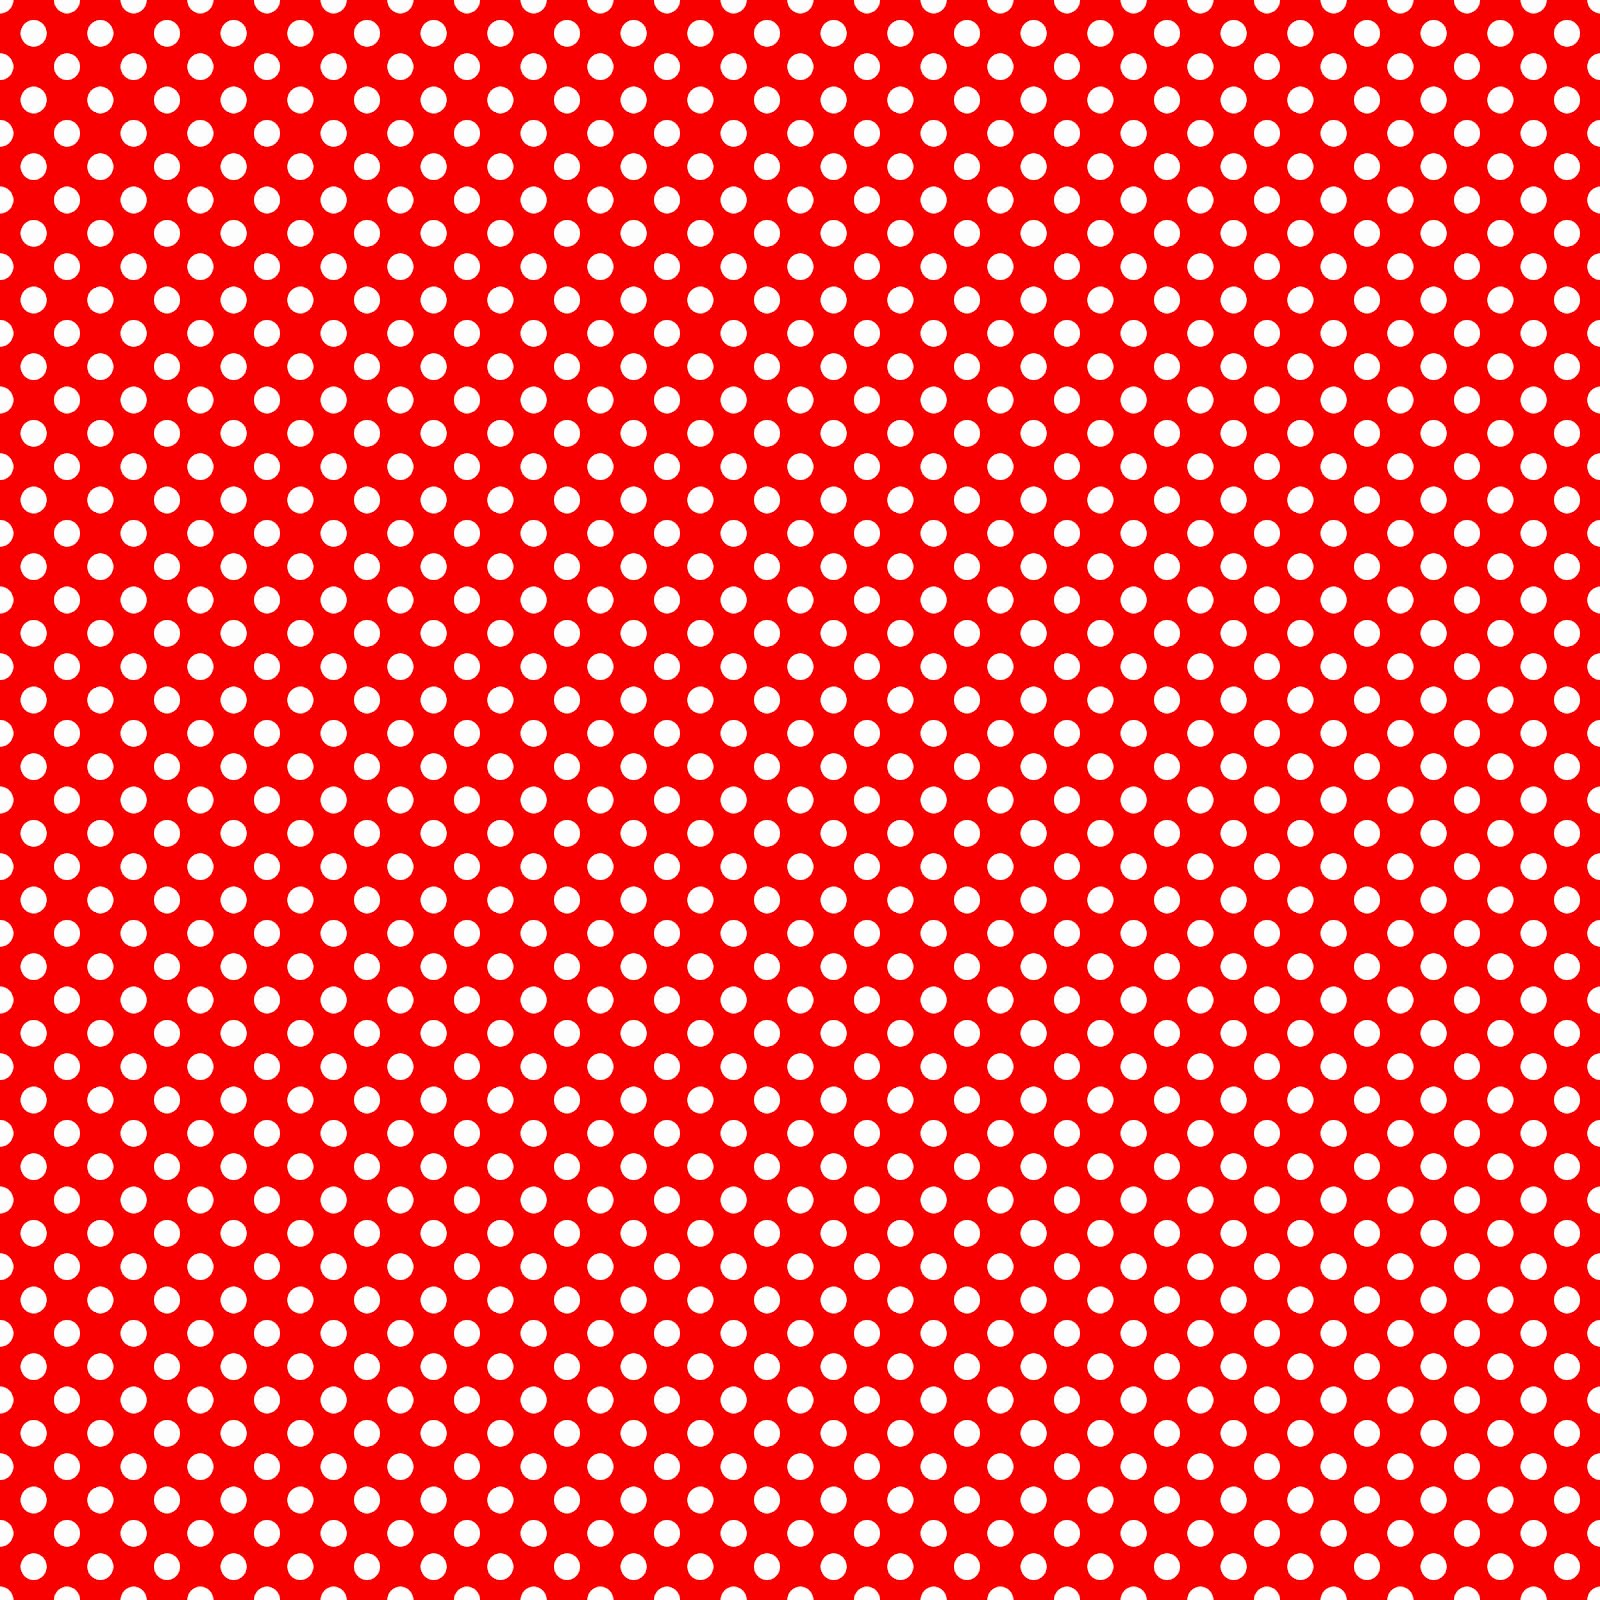 Red And White Polka Dot Background